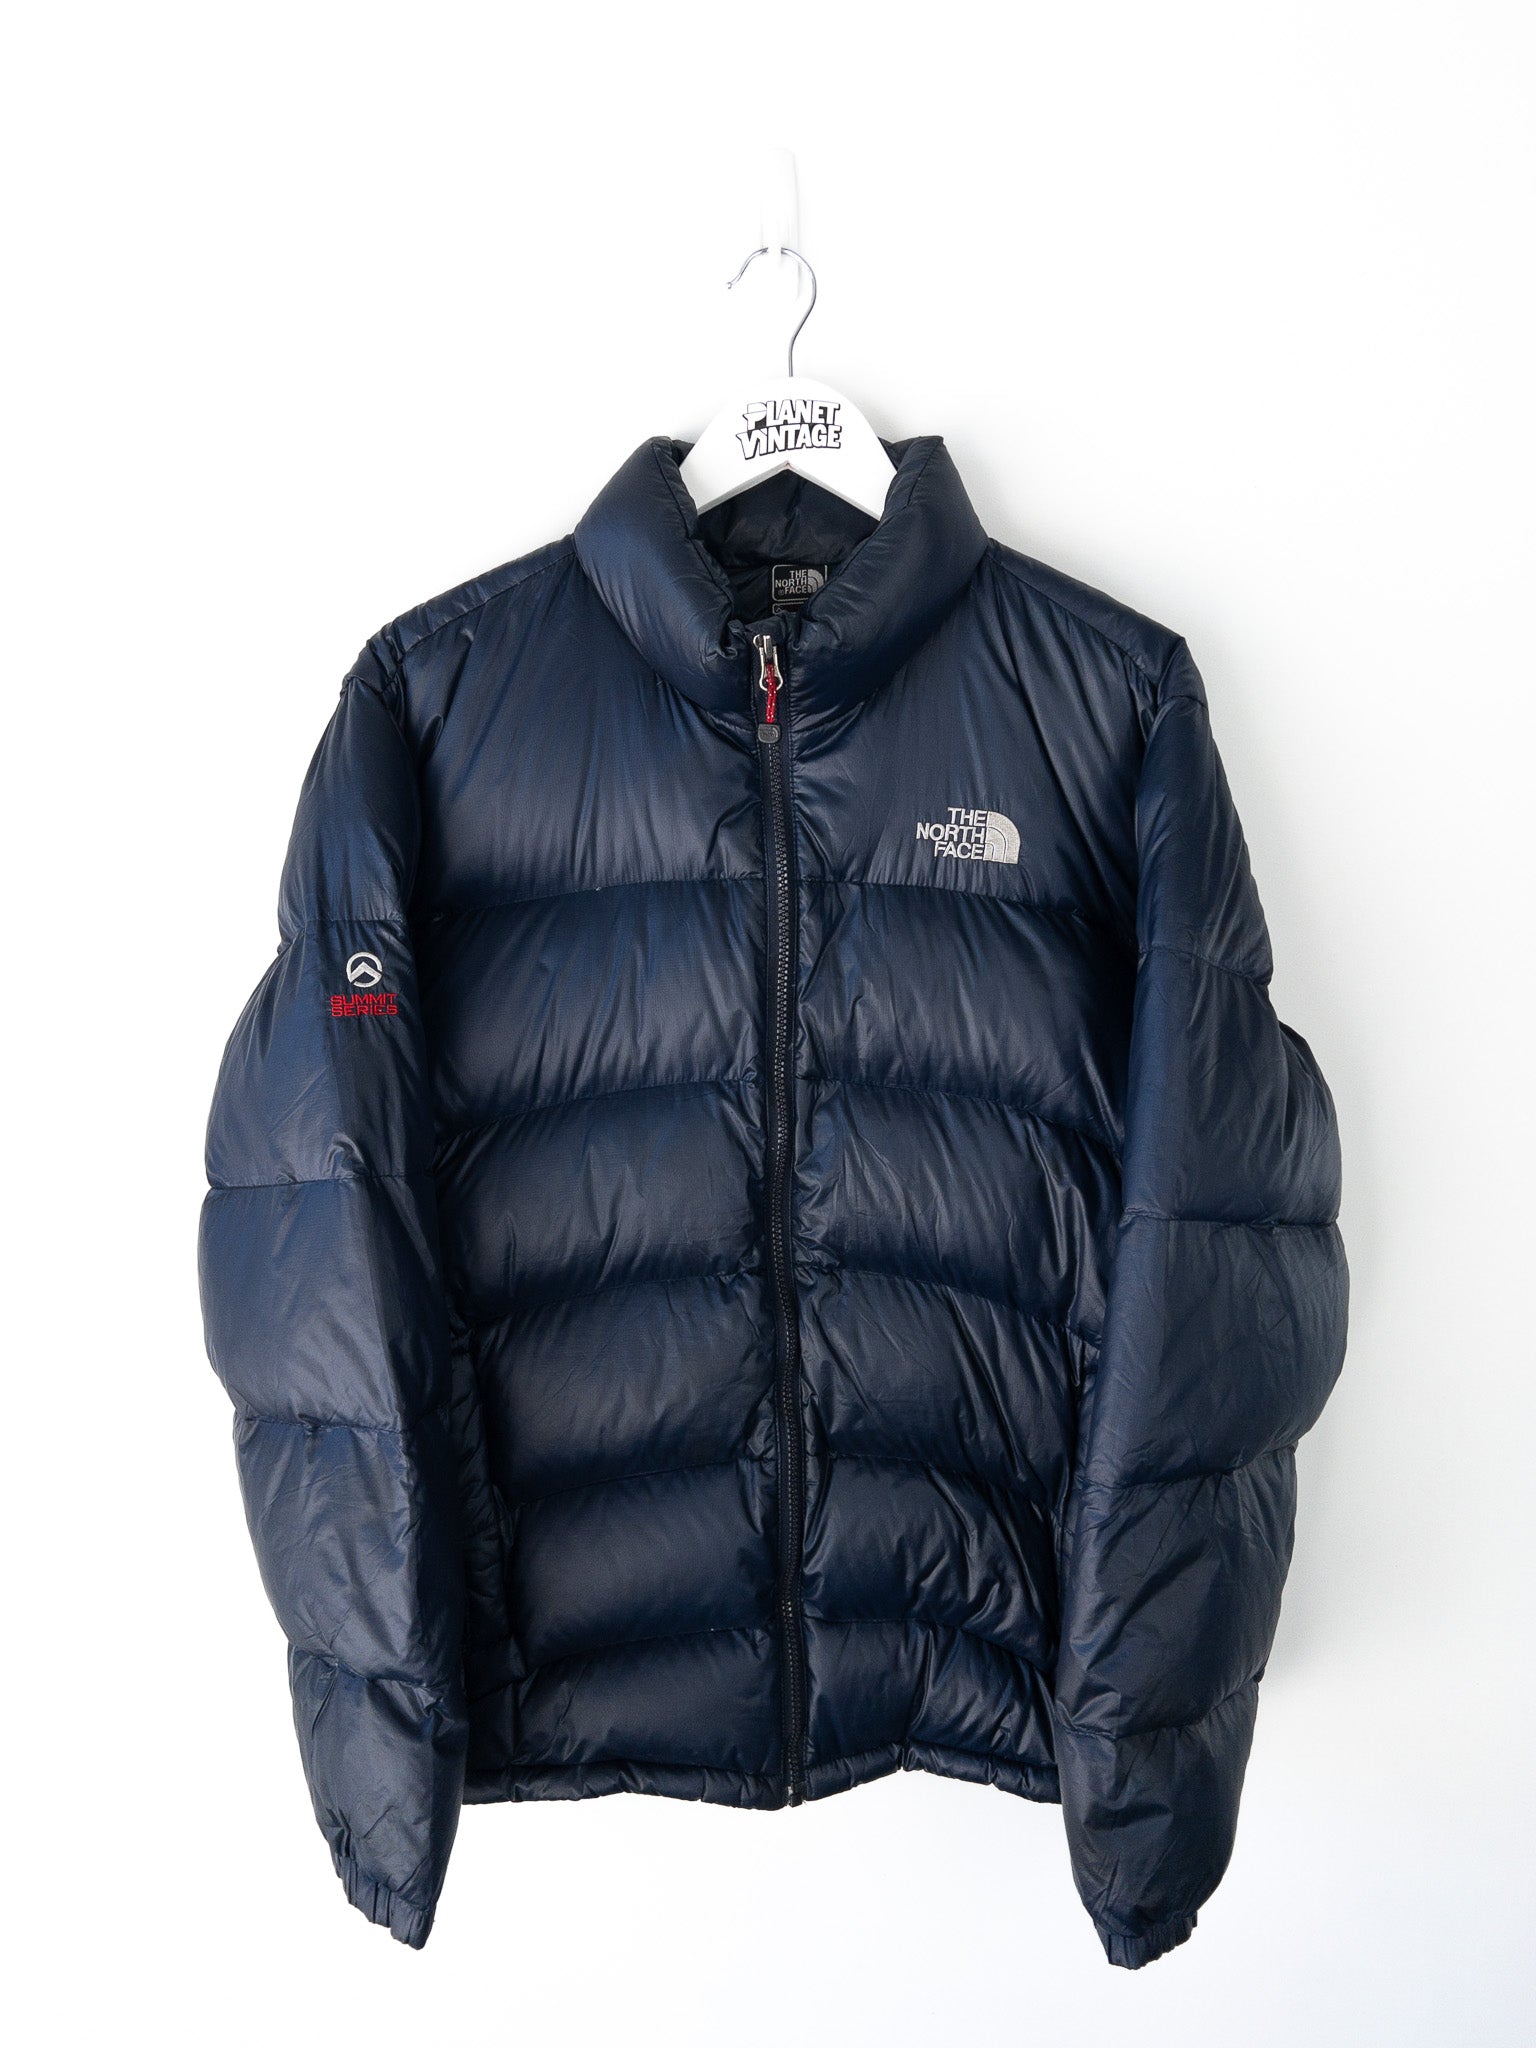 Vintage The North Face Puffer Jacket (M)